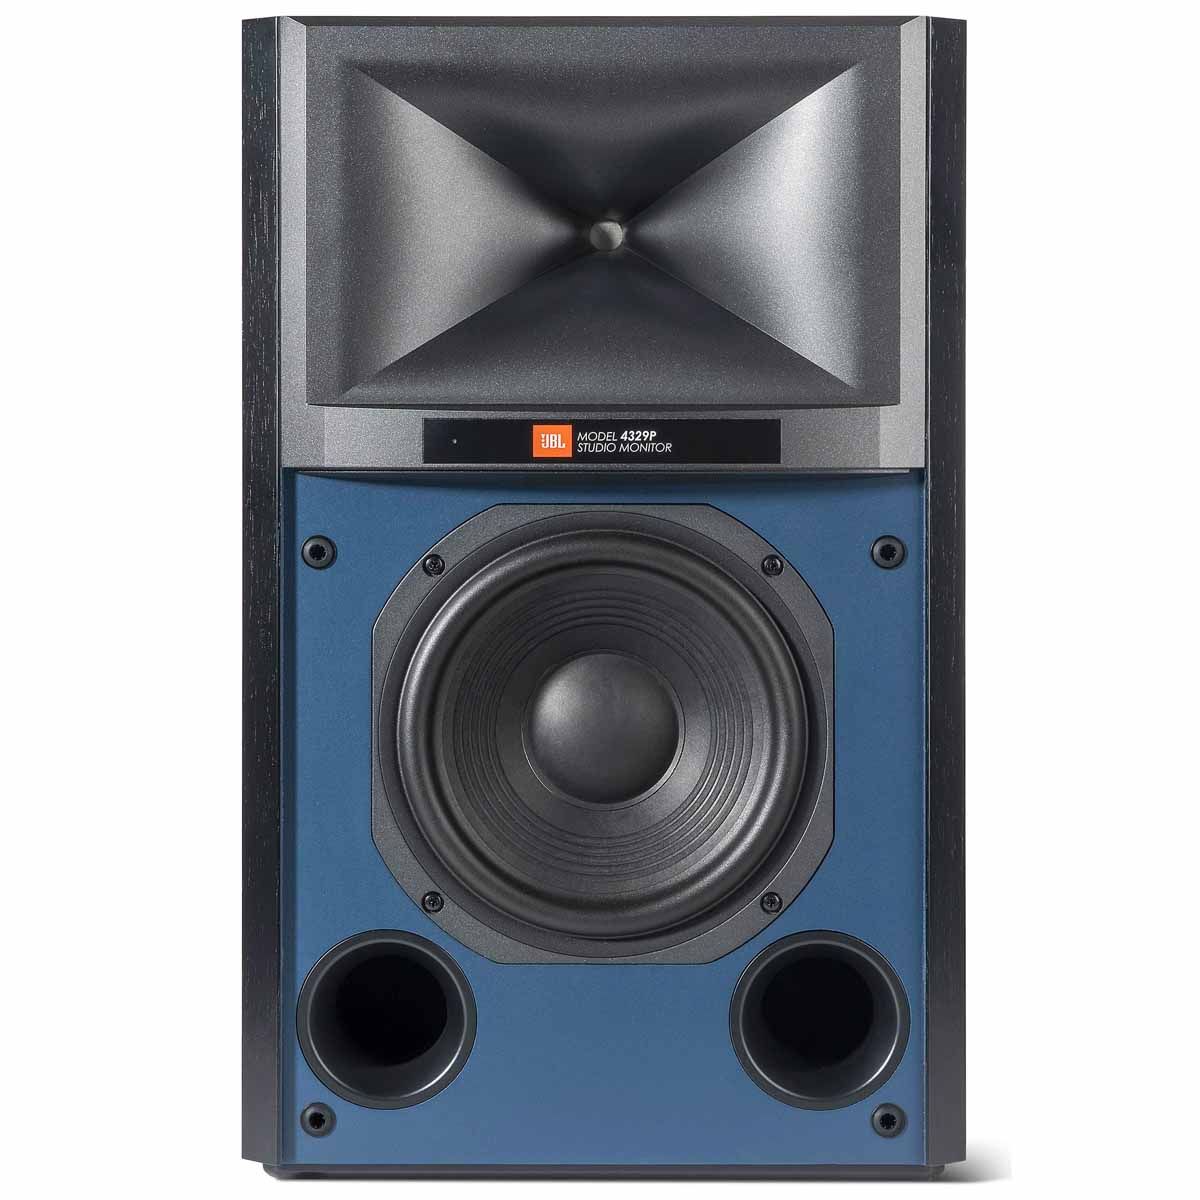 JBL 4329P Powered Studio Monitor - Pair - black front view without grille